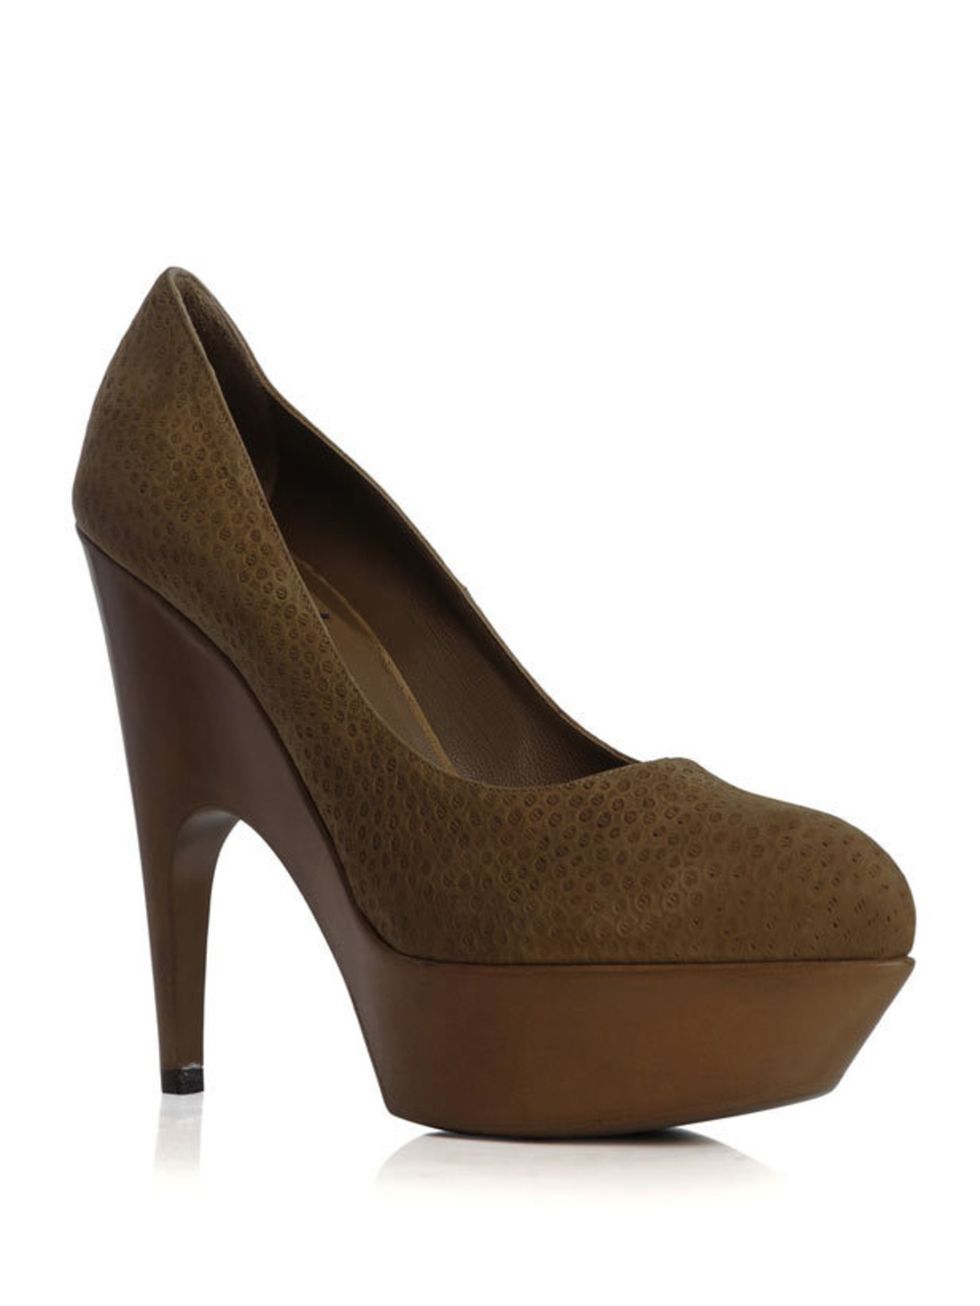 <p>Brown suede platform heels, £291.30, by Yves Saint Laurent at <a href="http://www.matchesfashion.com/fcp/product/Matches-Fashion/Shoes/yves-saint-laurent-ysl-w-229786-bq500-shoes/11466?colour=brown">Matches</a> </p>